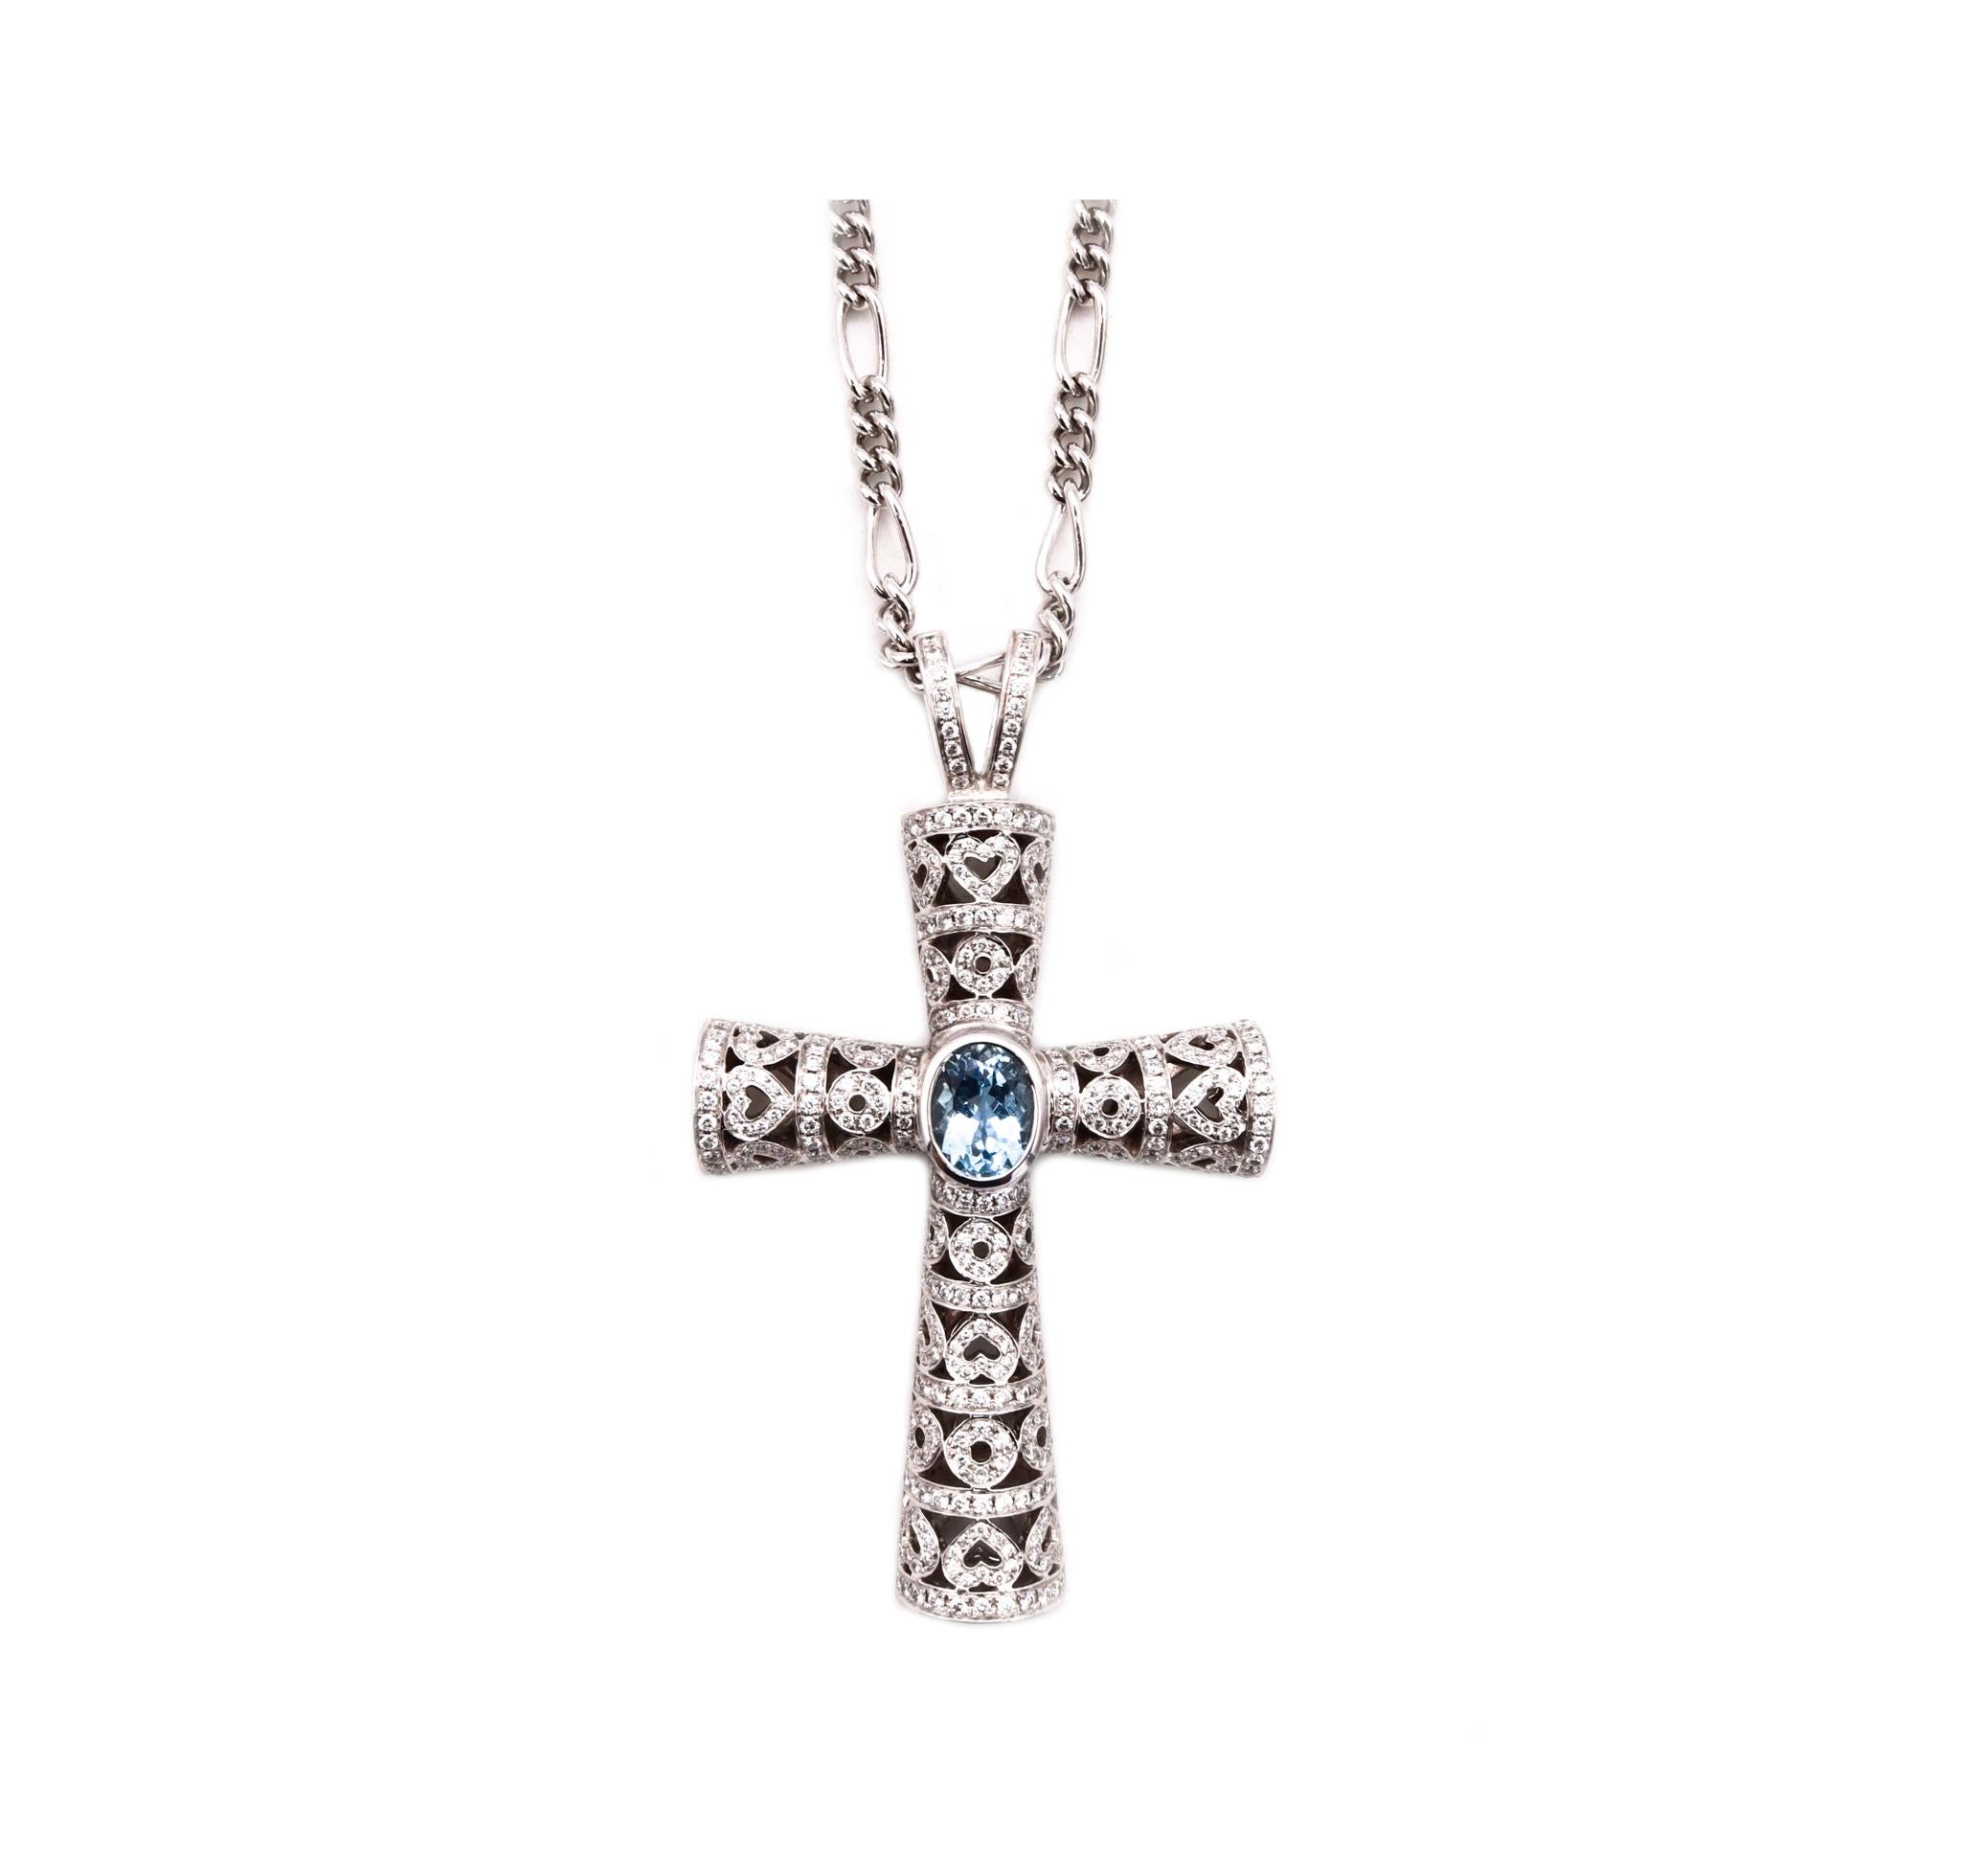 Theo Fennel London Chain with Cross 18Kt with 6.29 Cts in Diamonds & Aquamarine 4